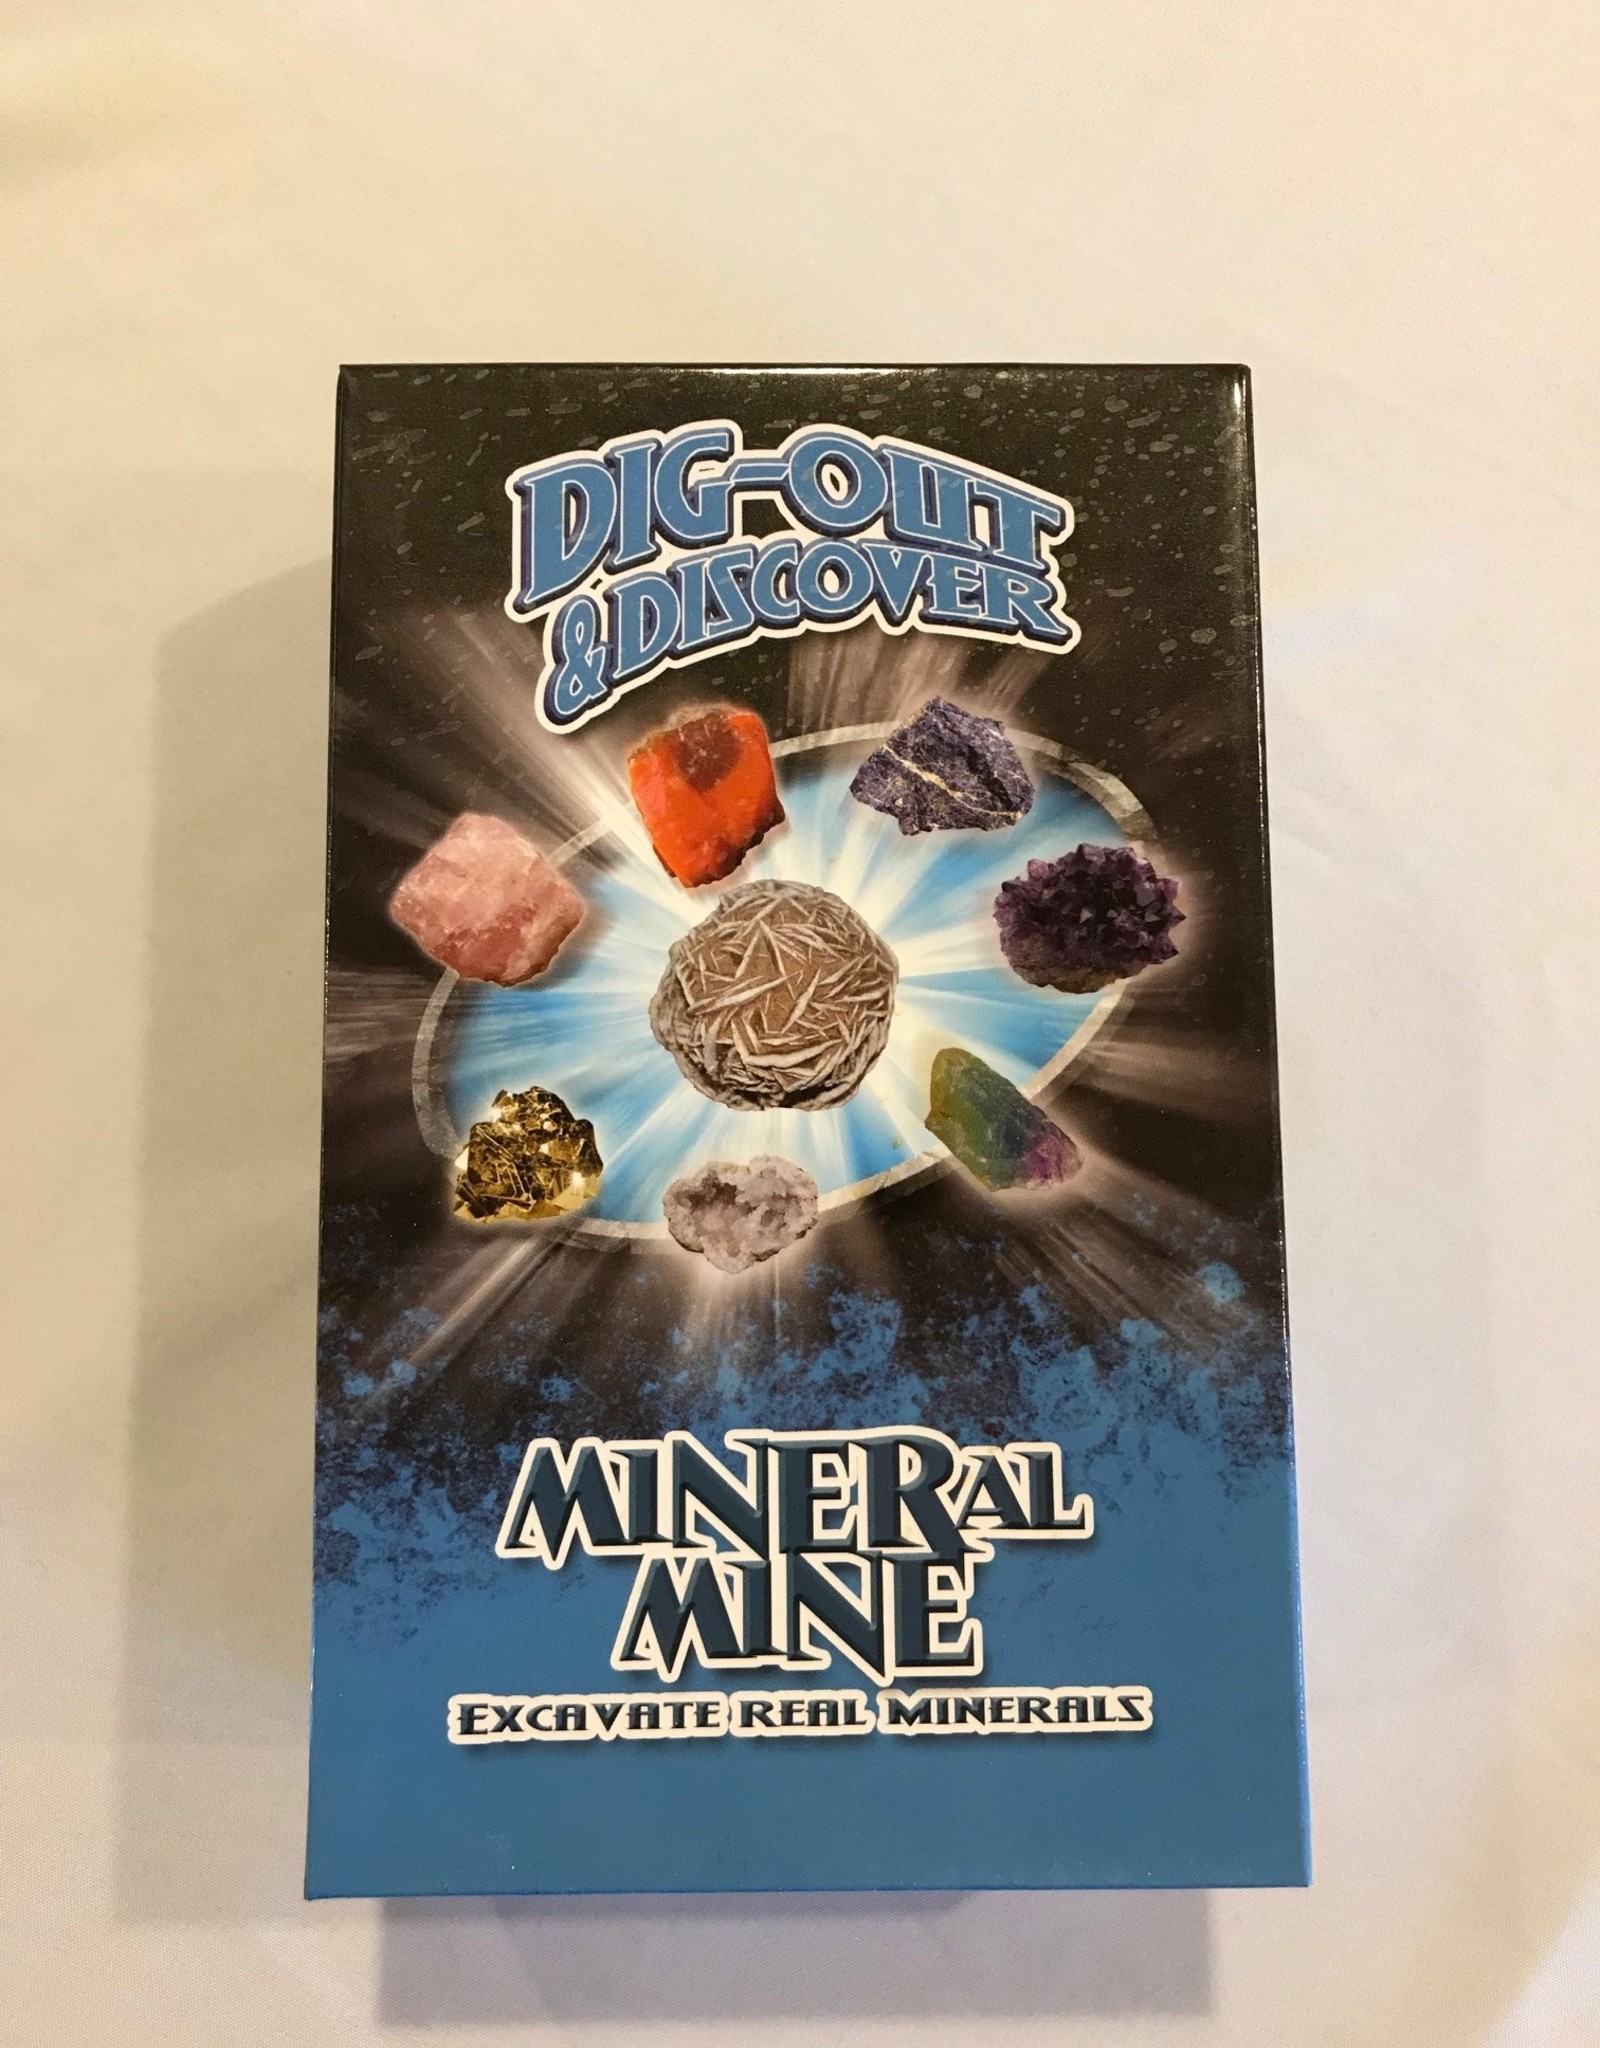 Dig-Out & Discover Mineral Mine